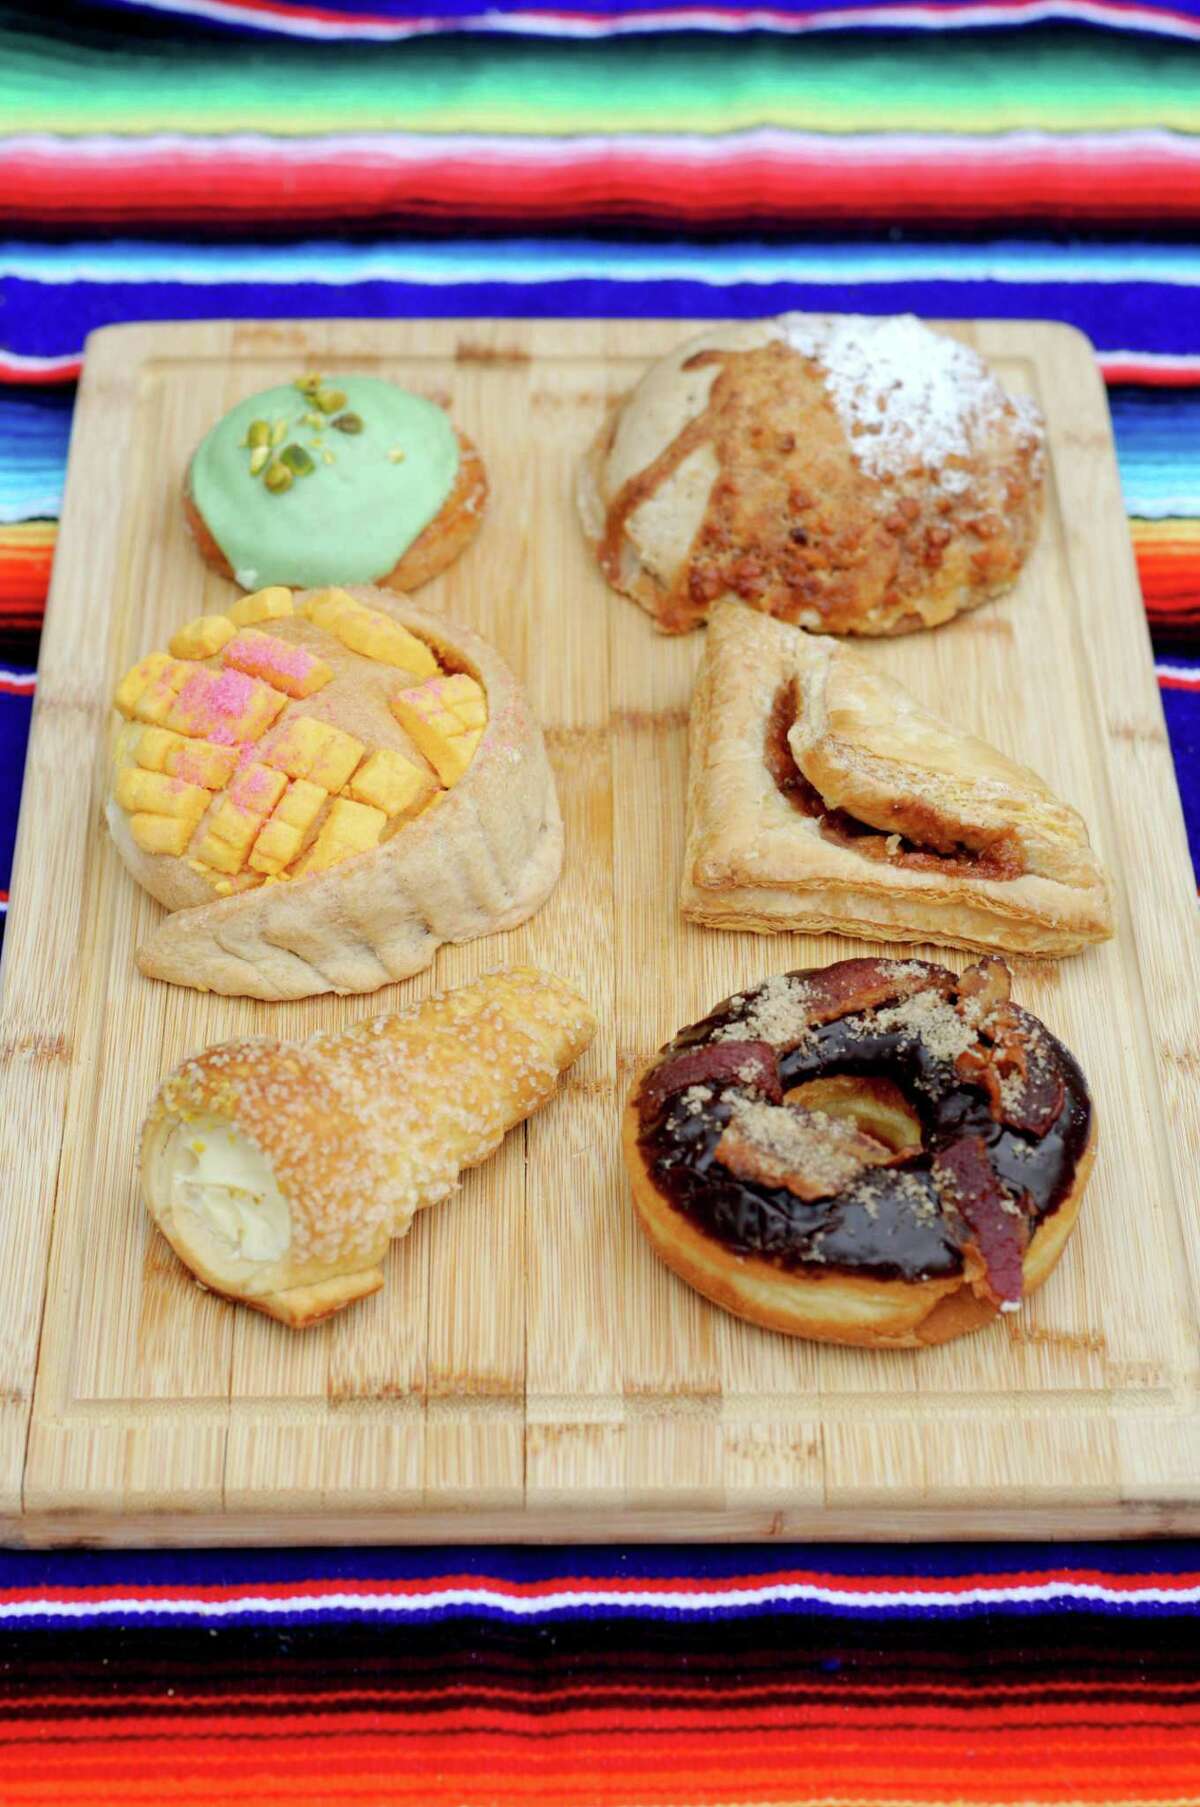 A selection of pastries from North Side Mexican bakeries